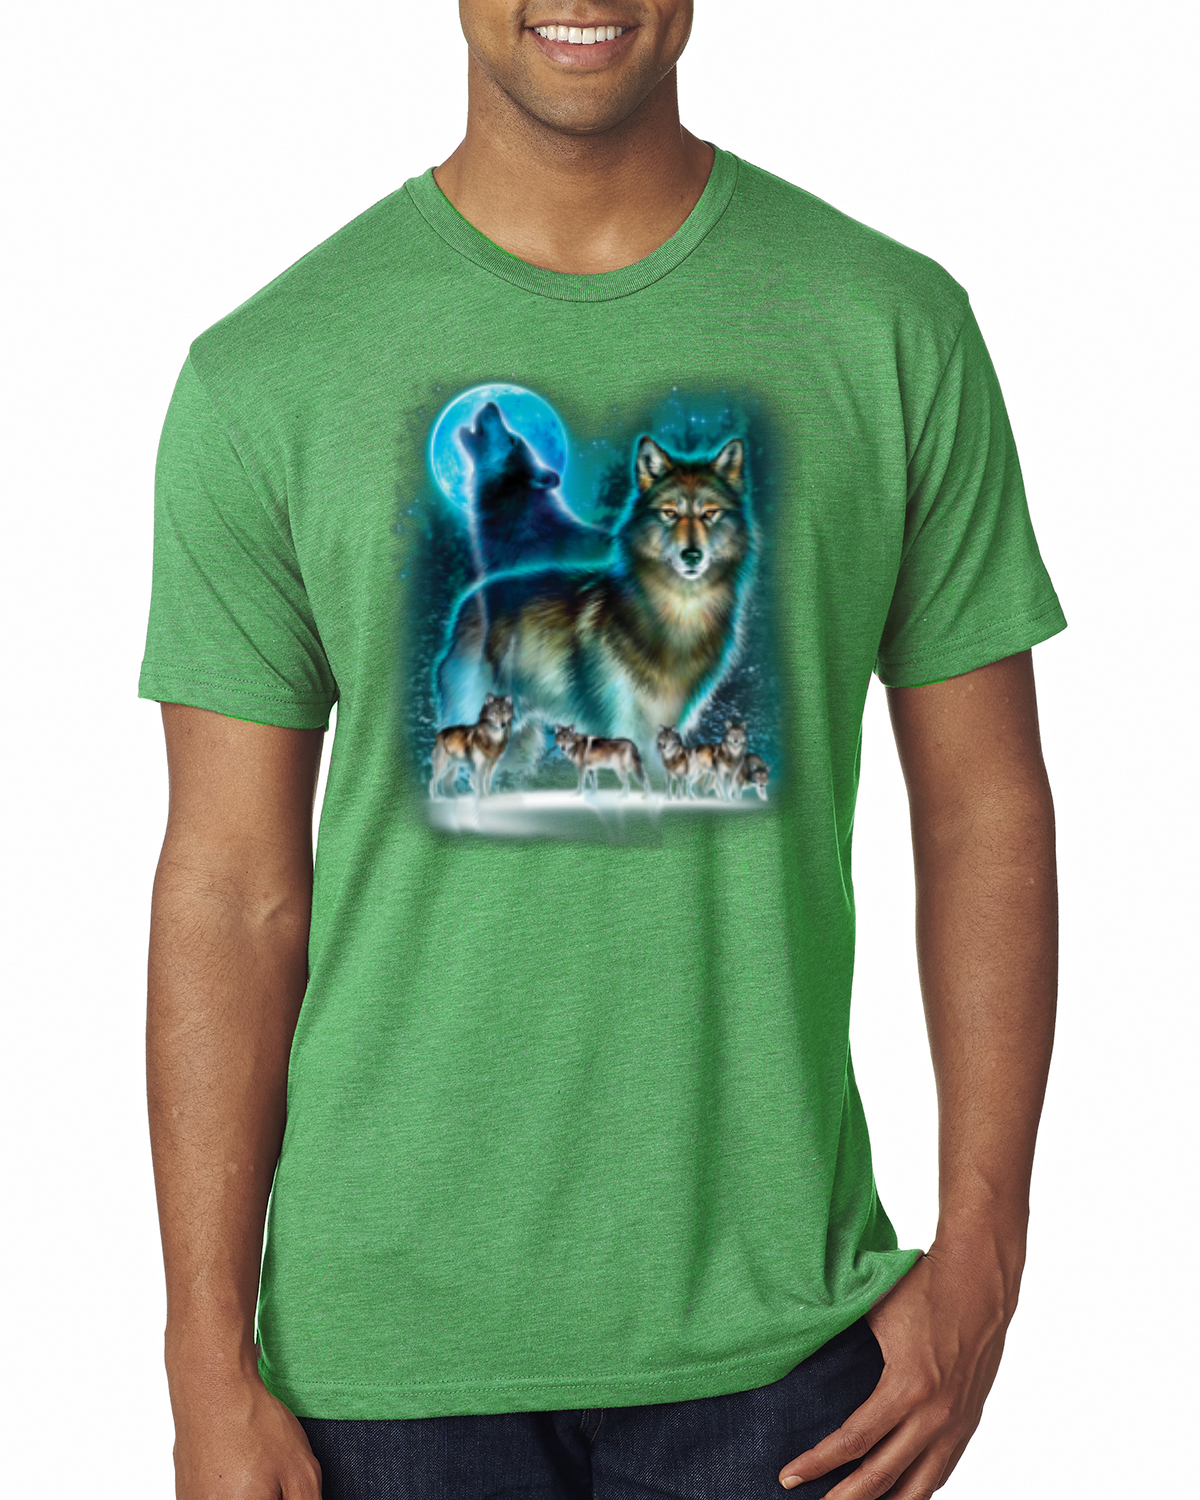 Wild Bobby, Wolf Howling At the Full Moon Wolf Pack Animal Lover Mens Premium Tri Blend T-Shirt, Envy, Small - image 1 of 3